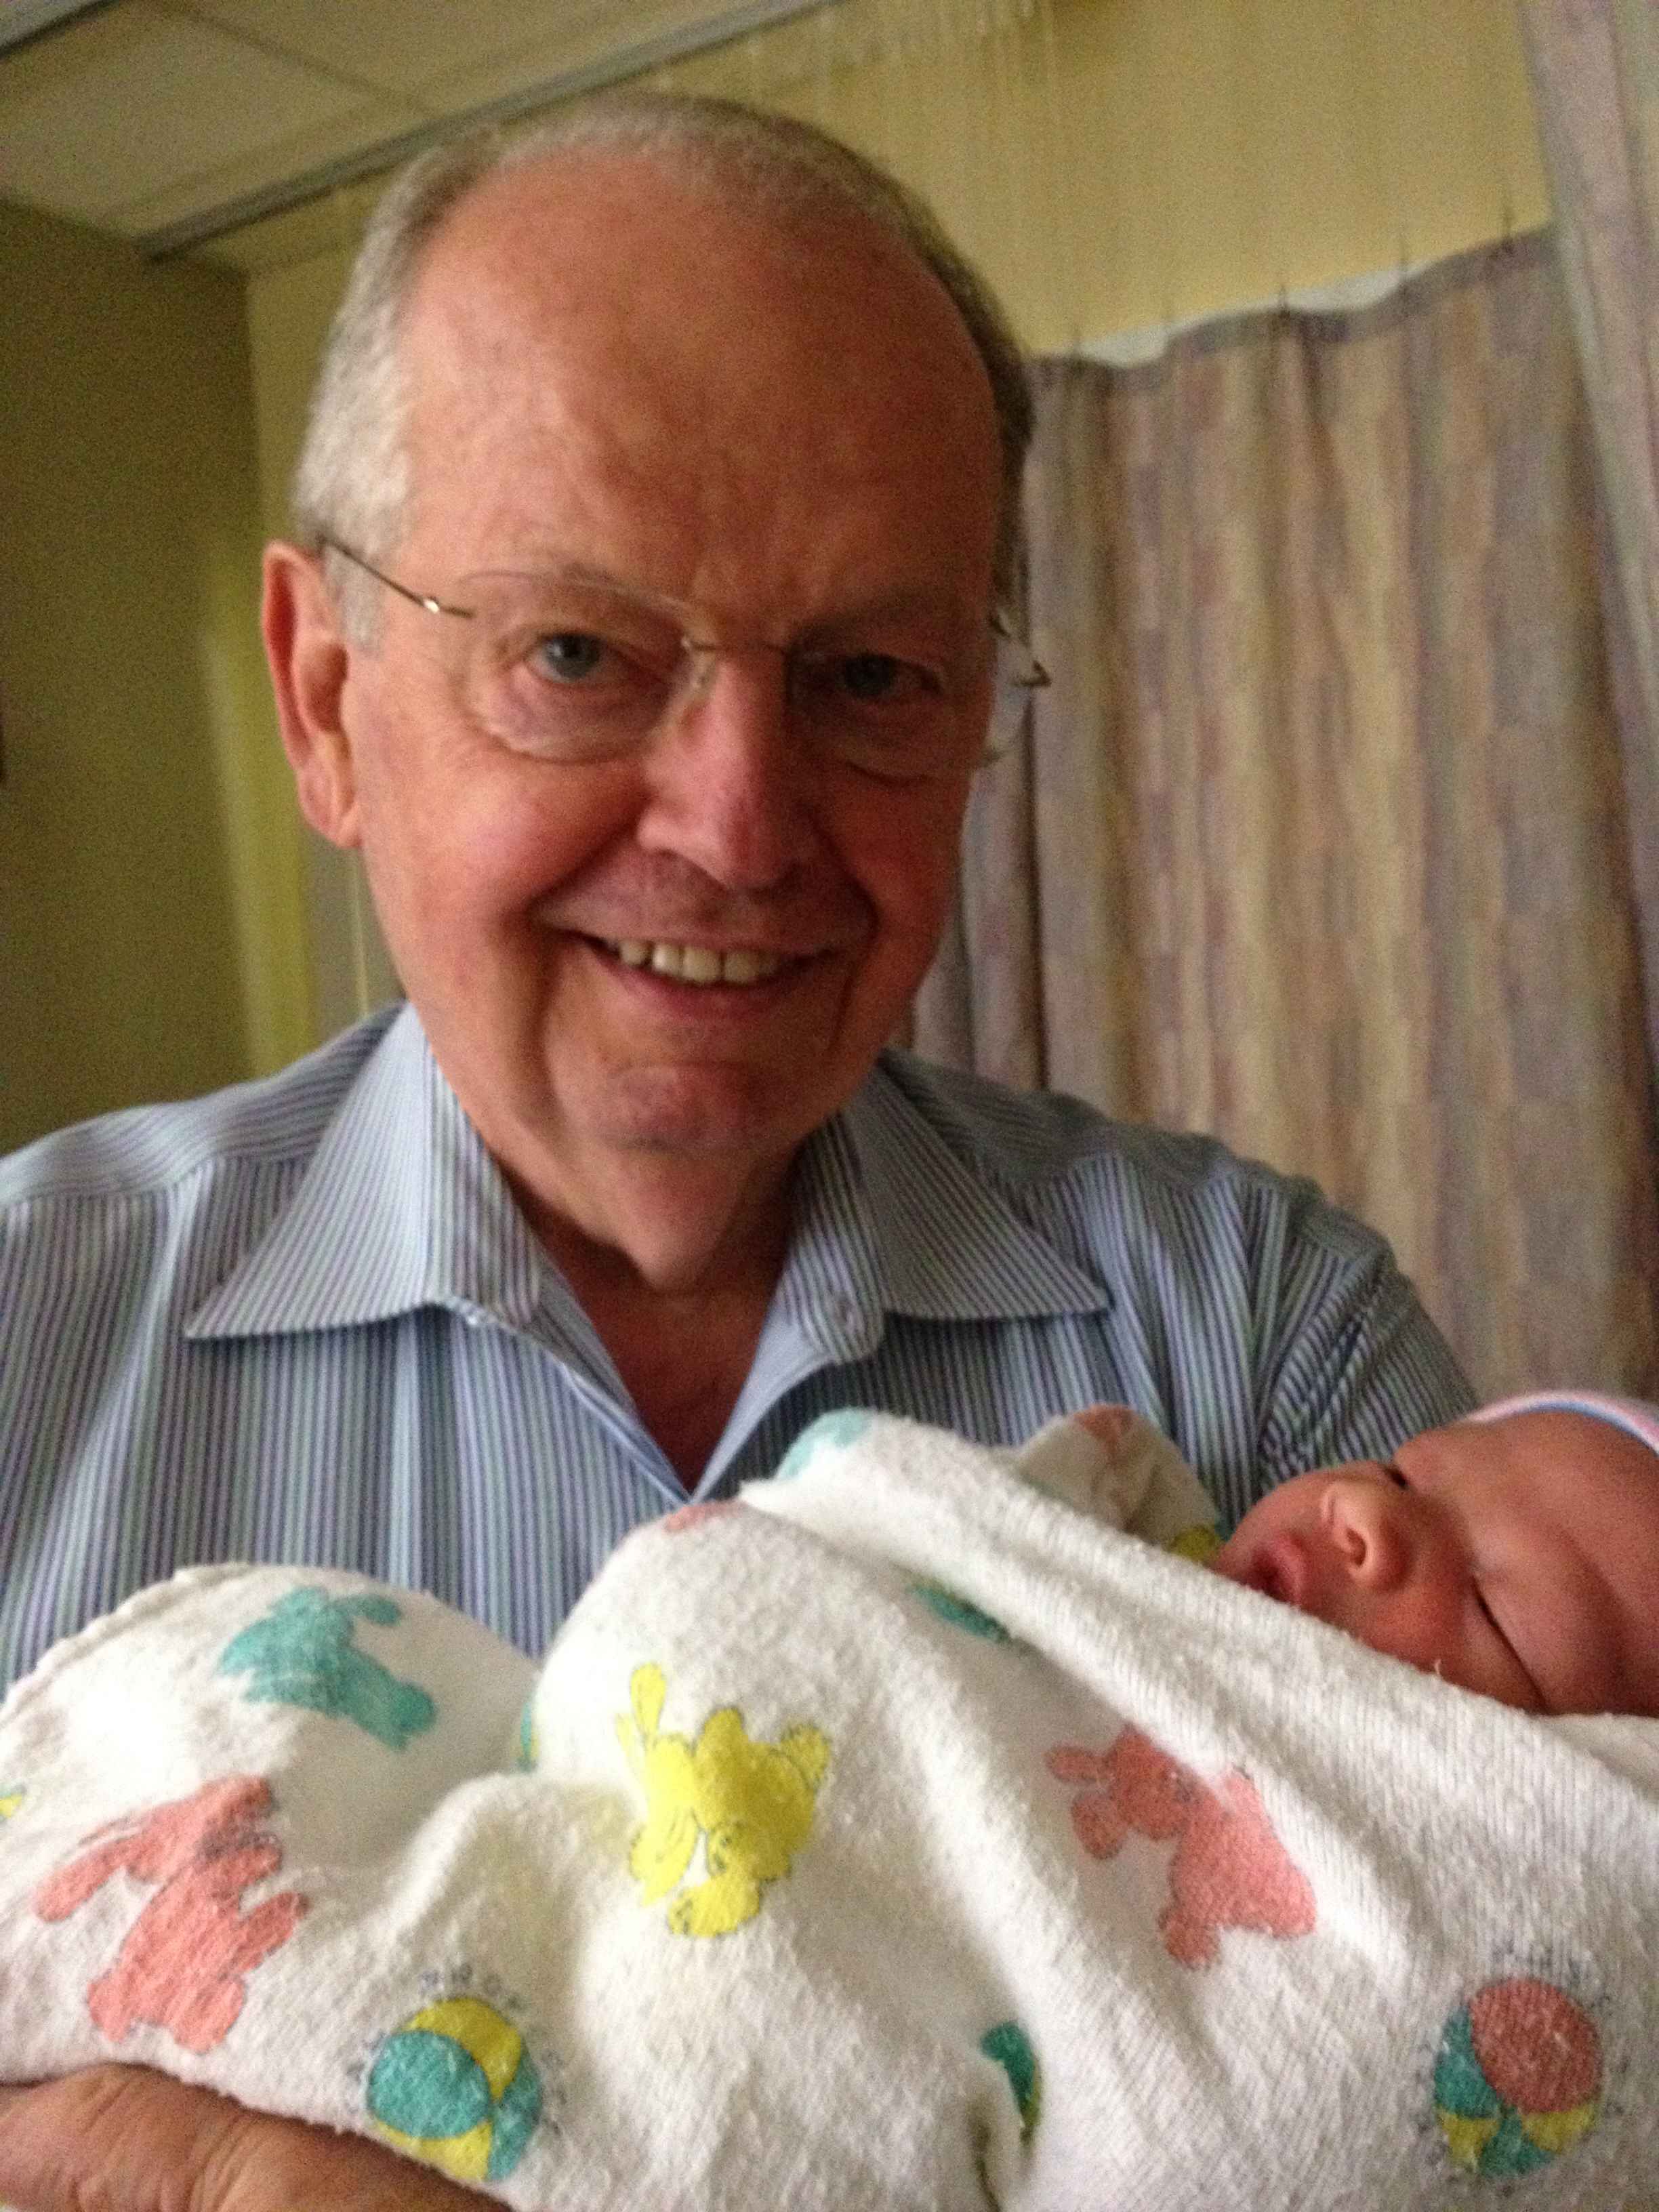 Ward and his new great grandson, Blake